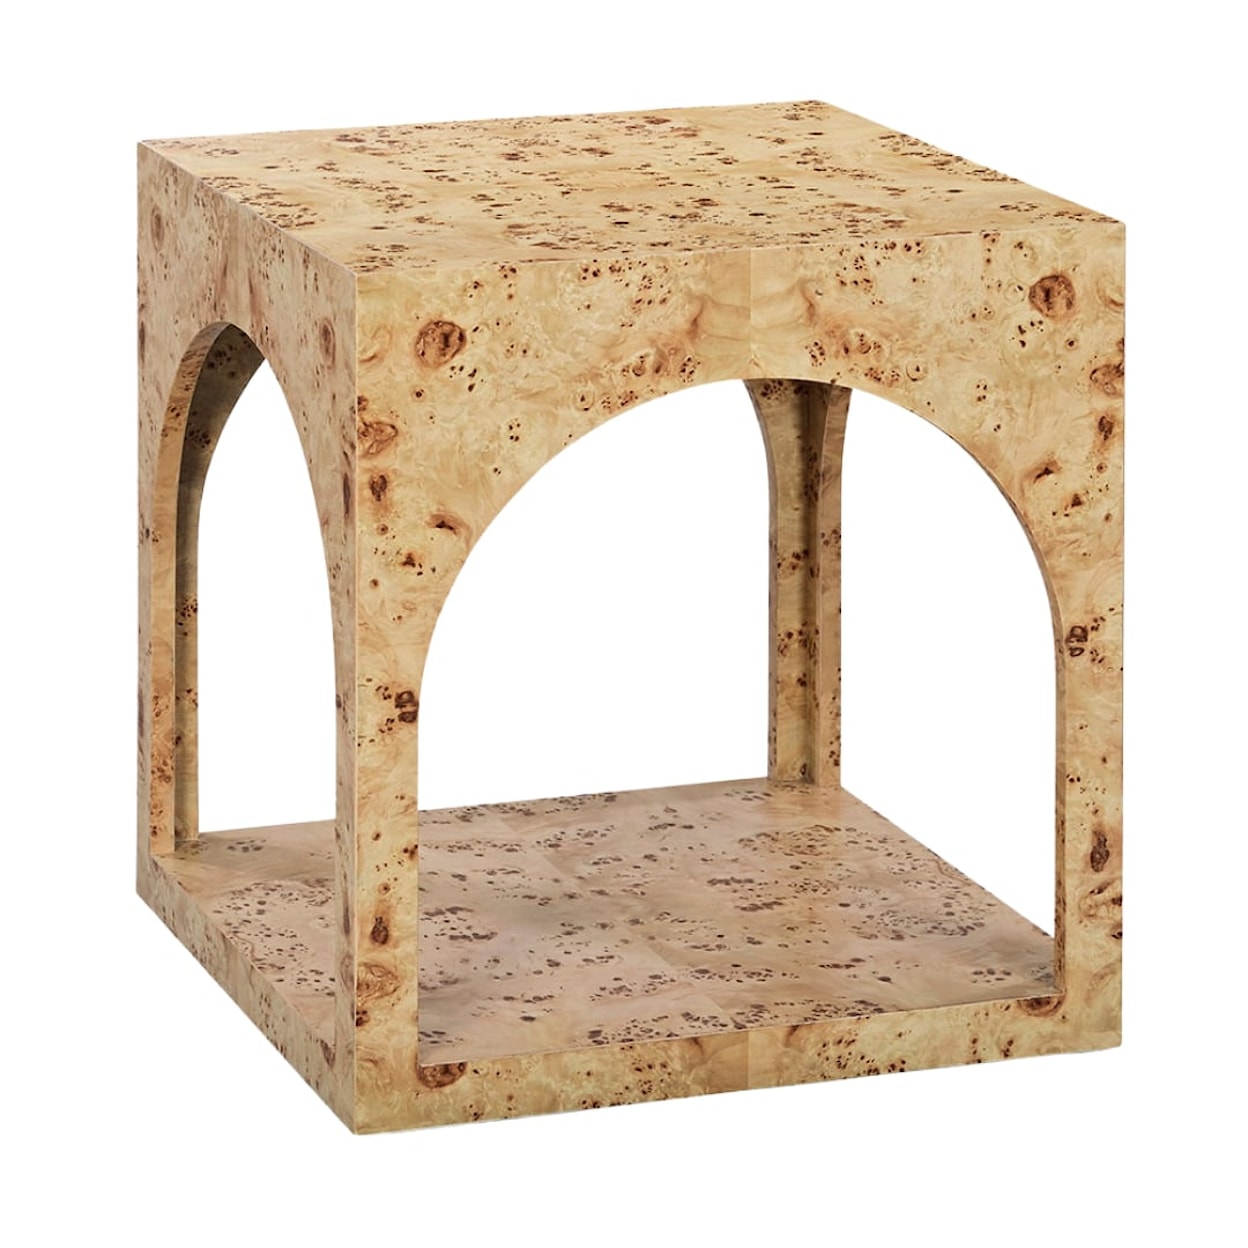 Oliver Home Furnishings End/ Side Tables ARCH SIDE TABLE